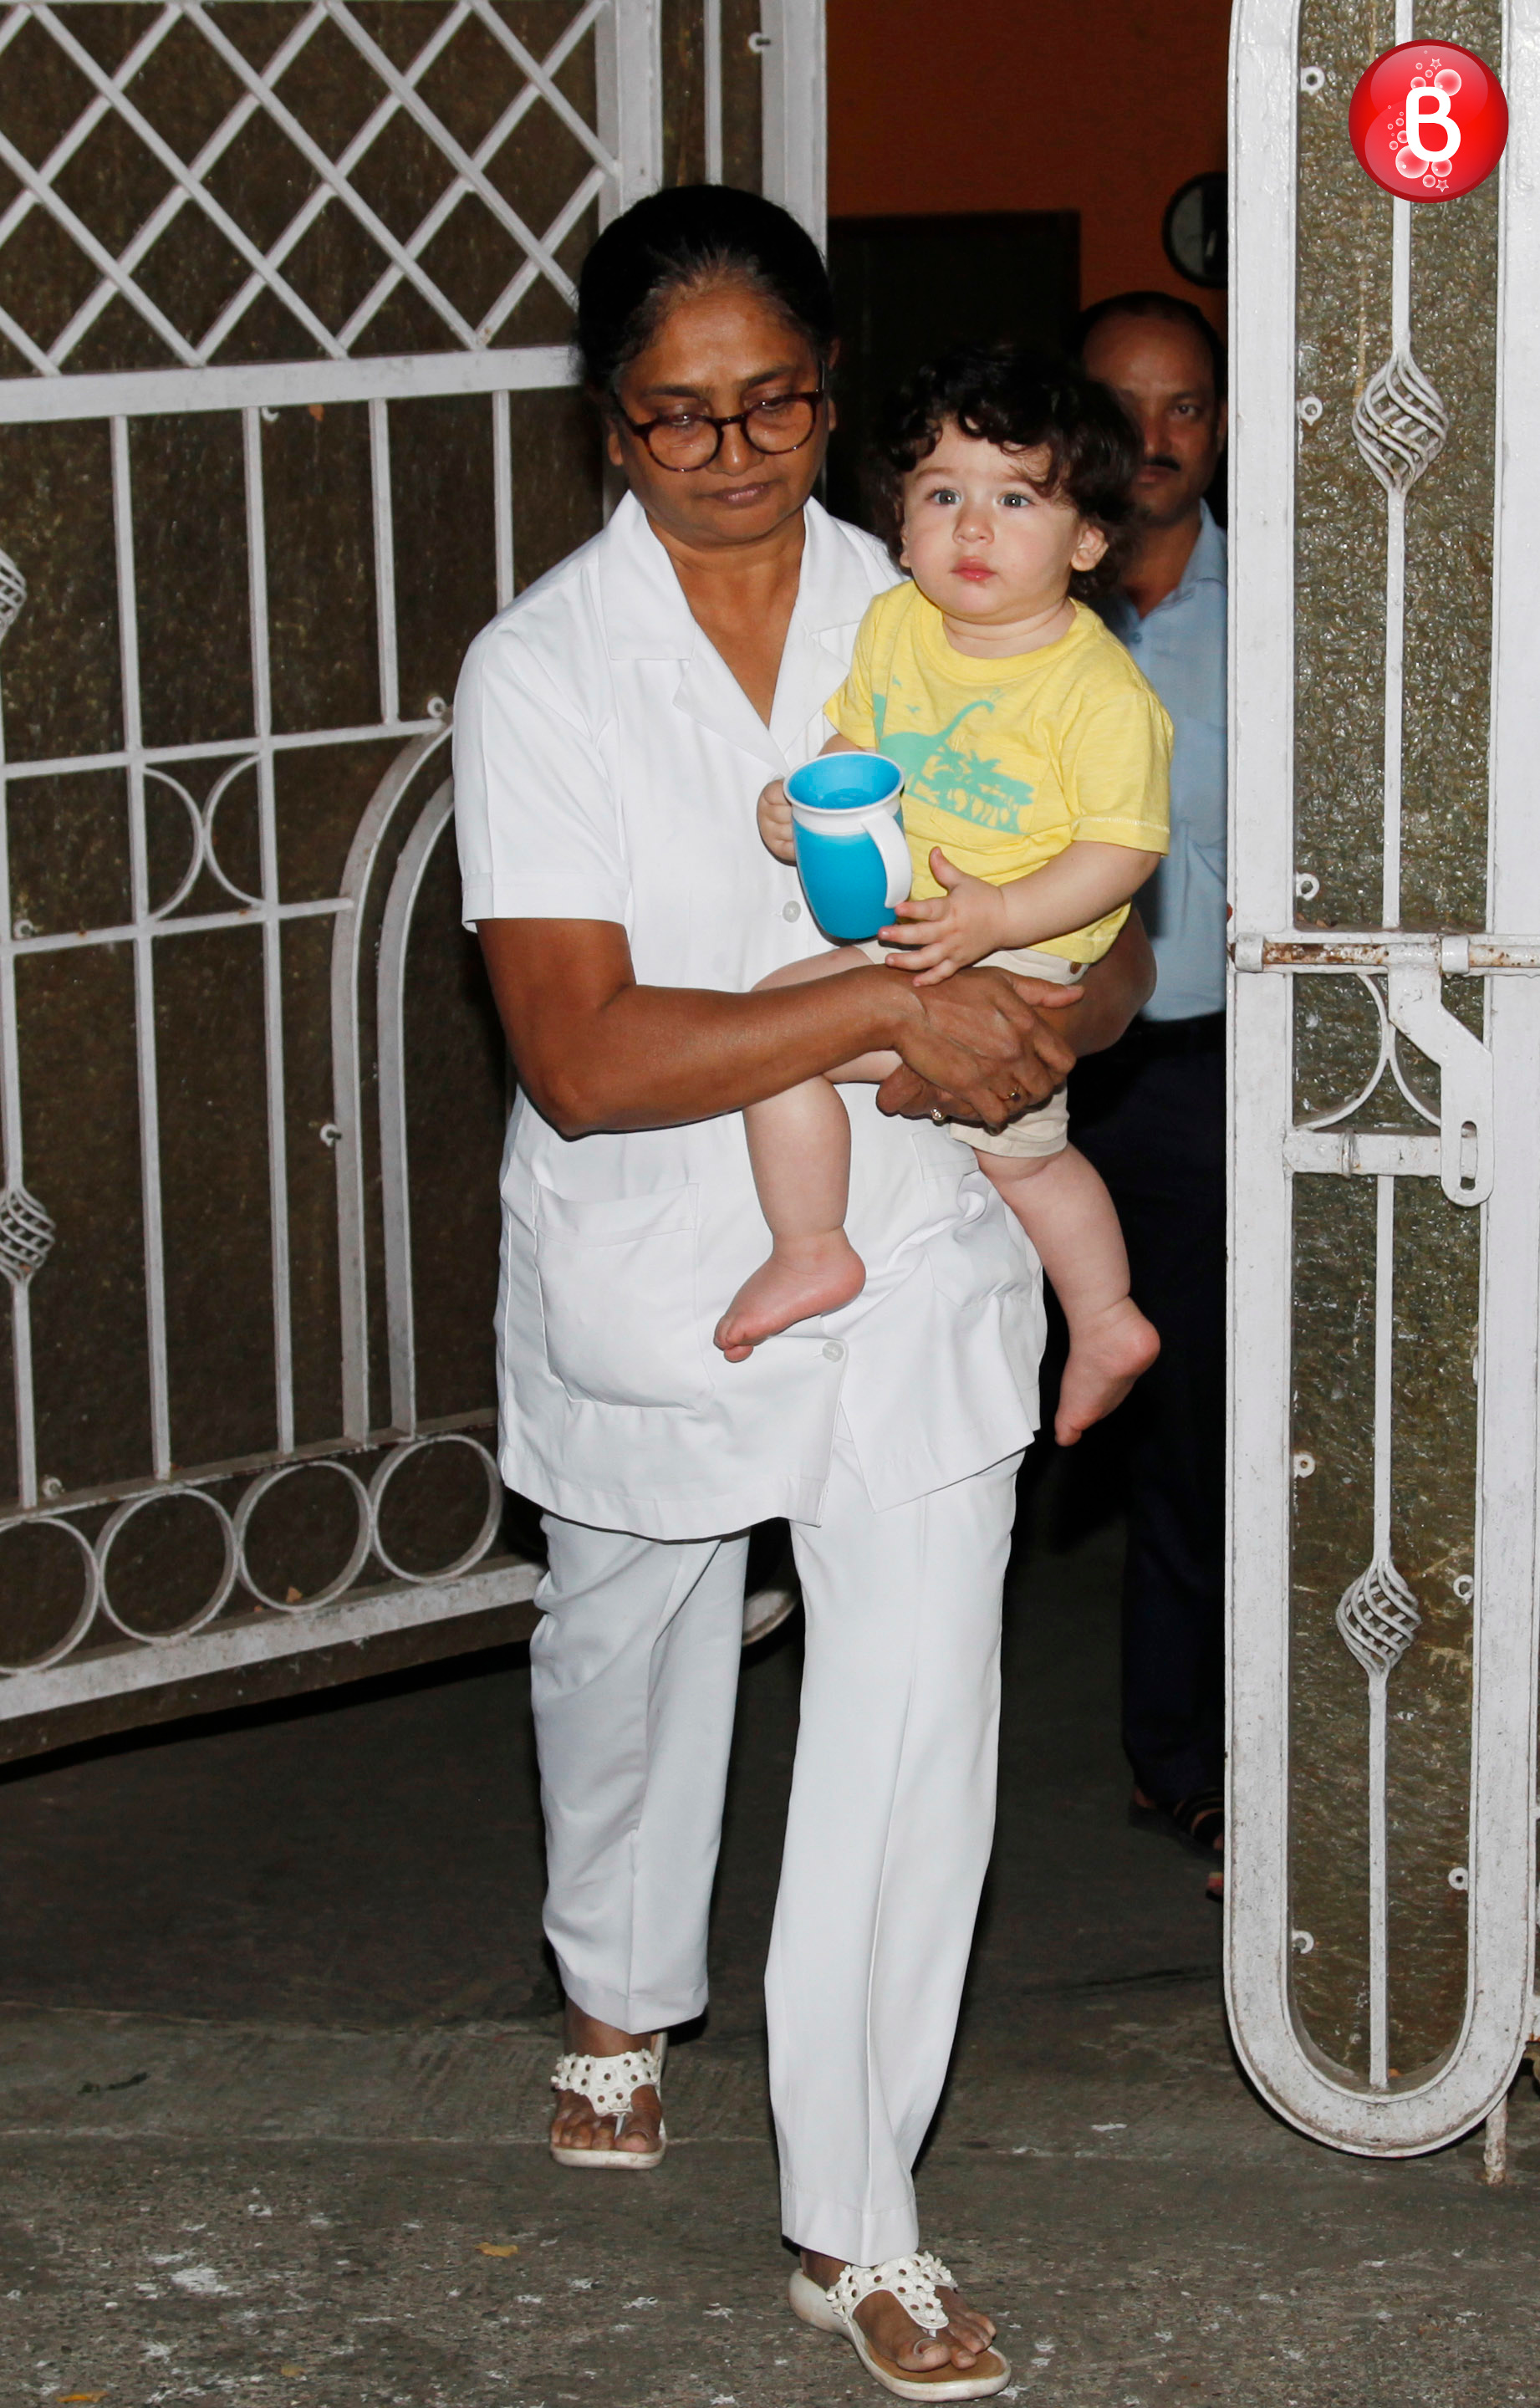 Taimur Ali Khan and Laksshya Kapoor are spotted together